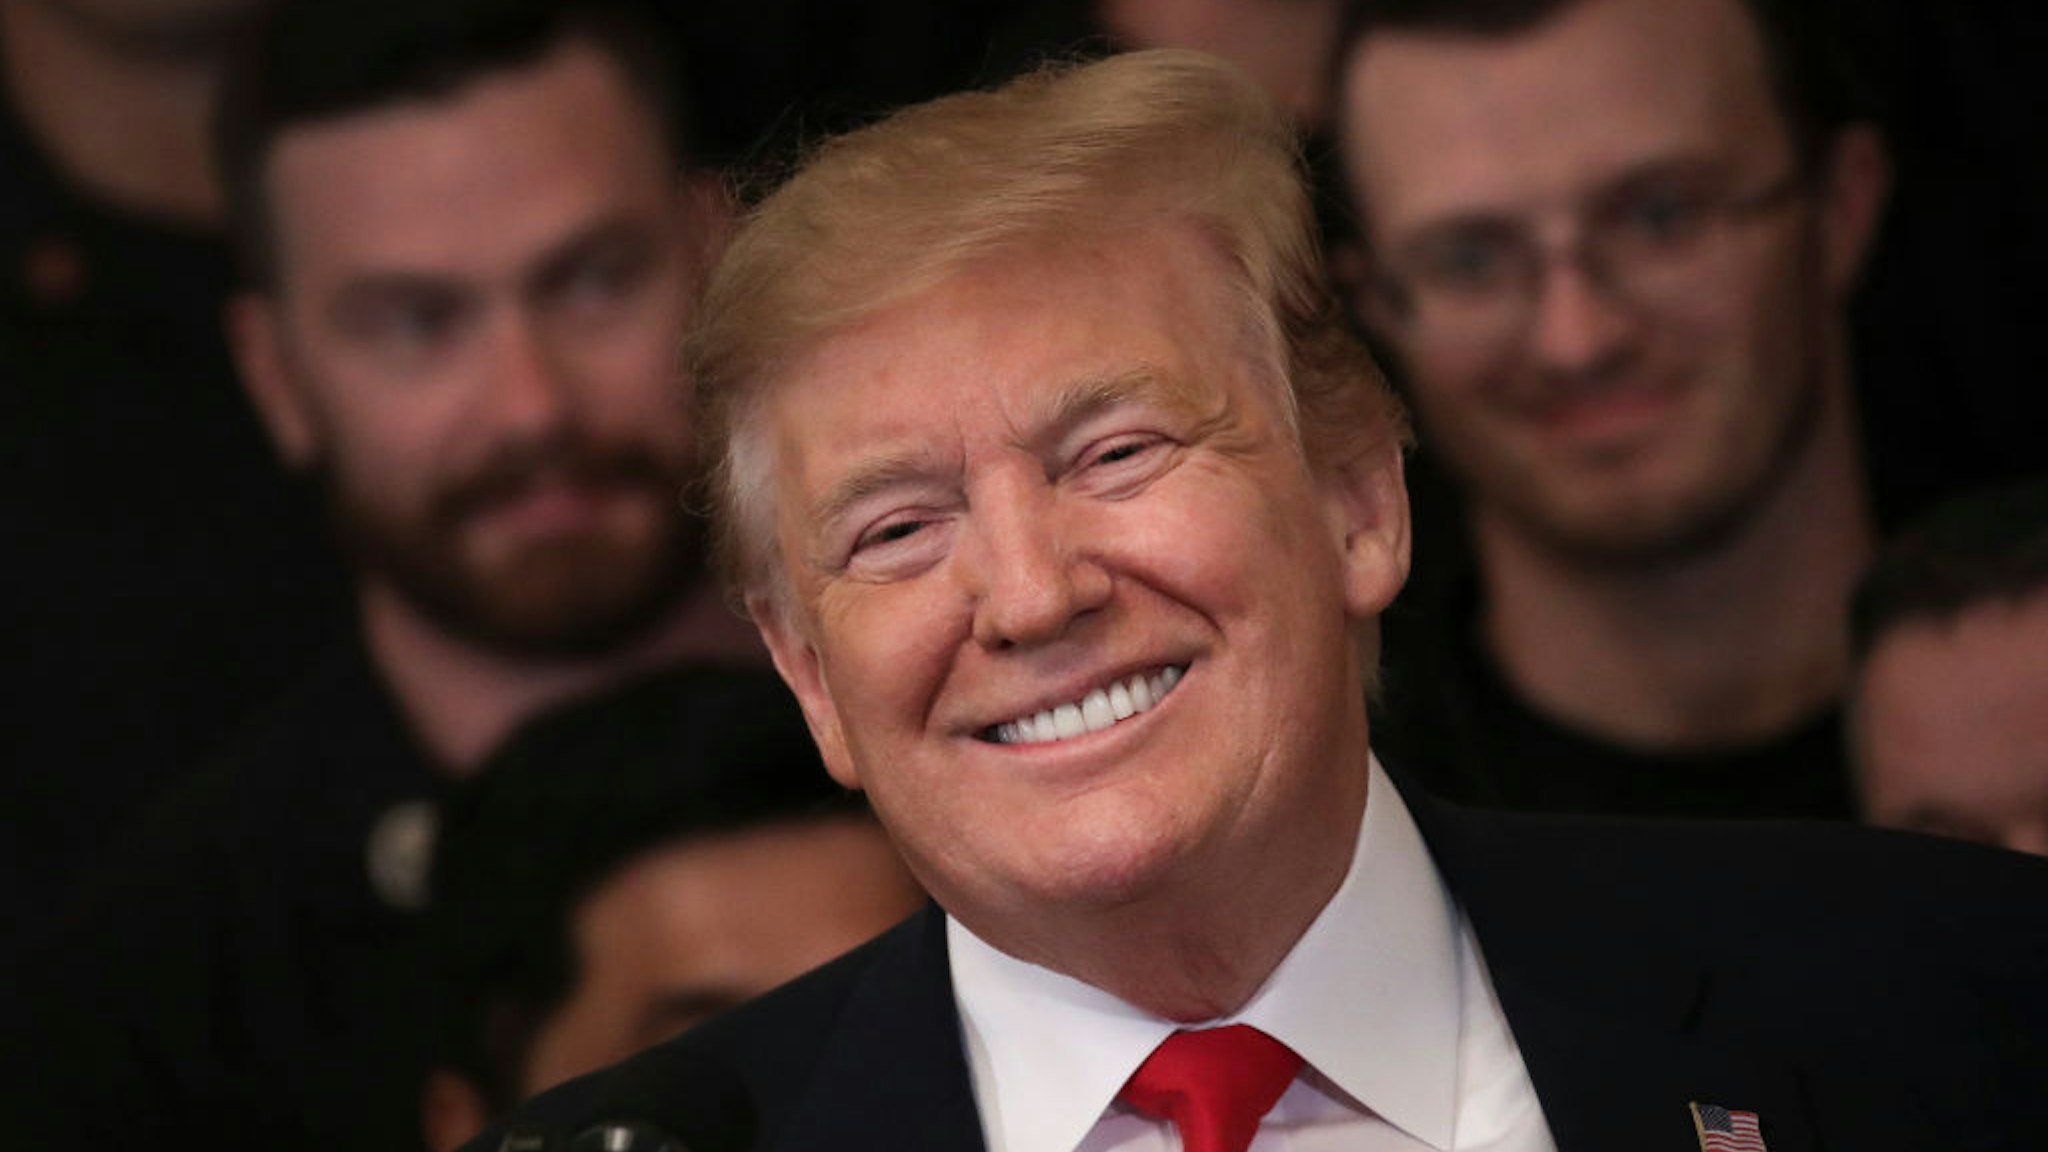 President Donald Trump smiles during an event recognizing the Wounded Warrior Project Soldier Ride